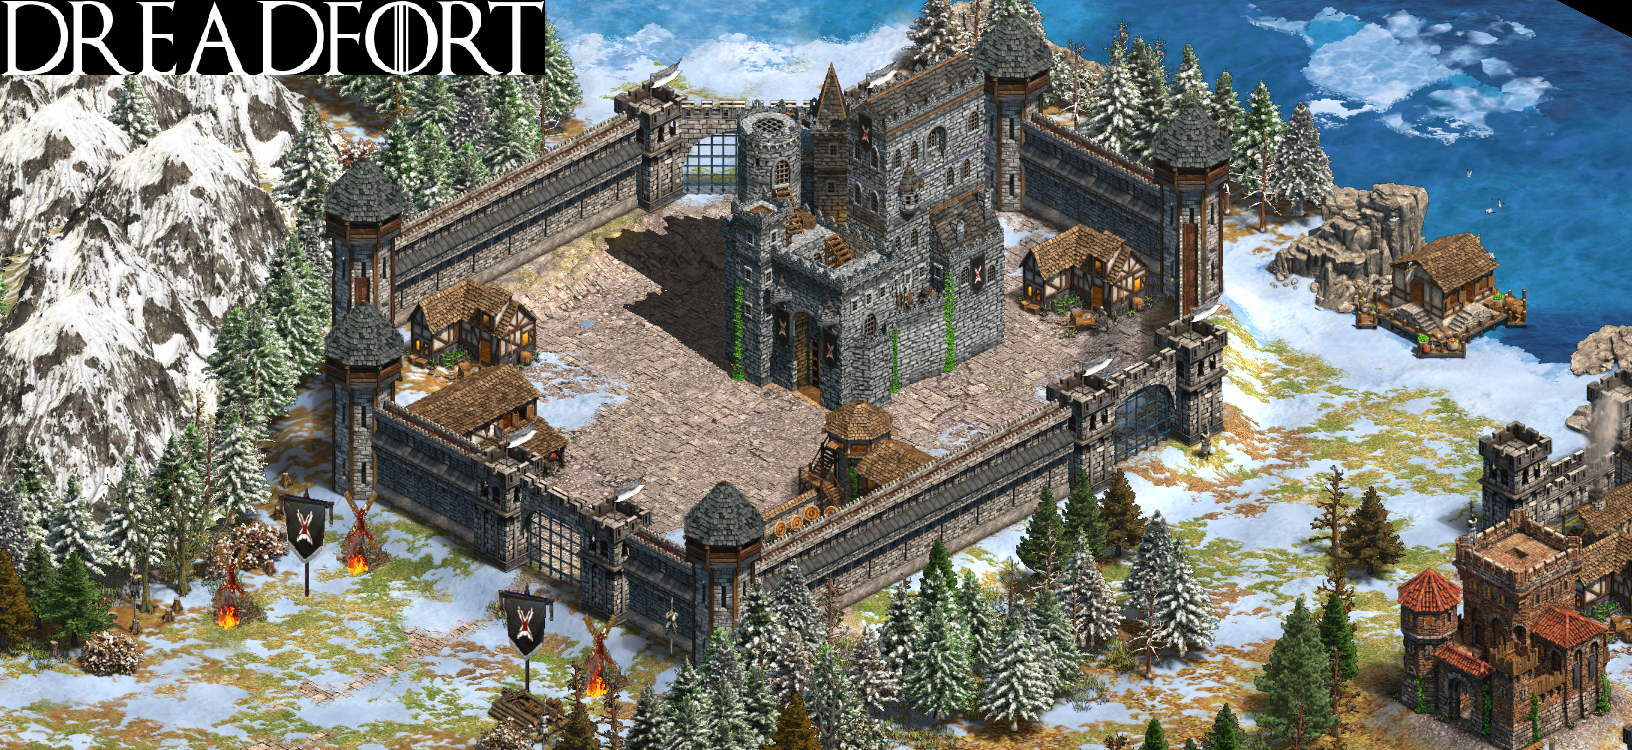 Game of Thrones (Age of Empires 2) mod - ModDB